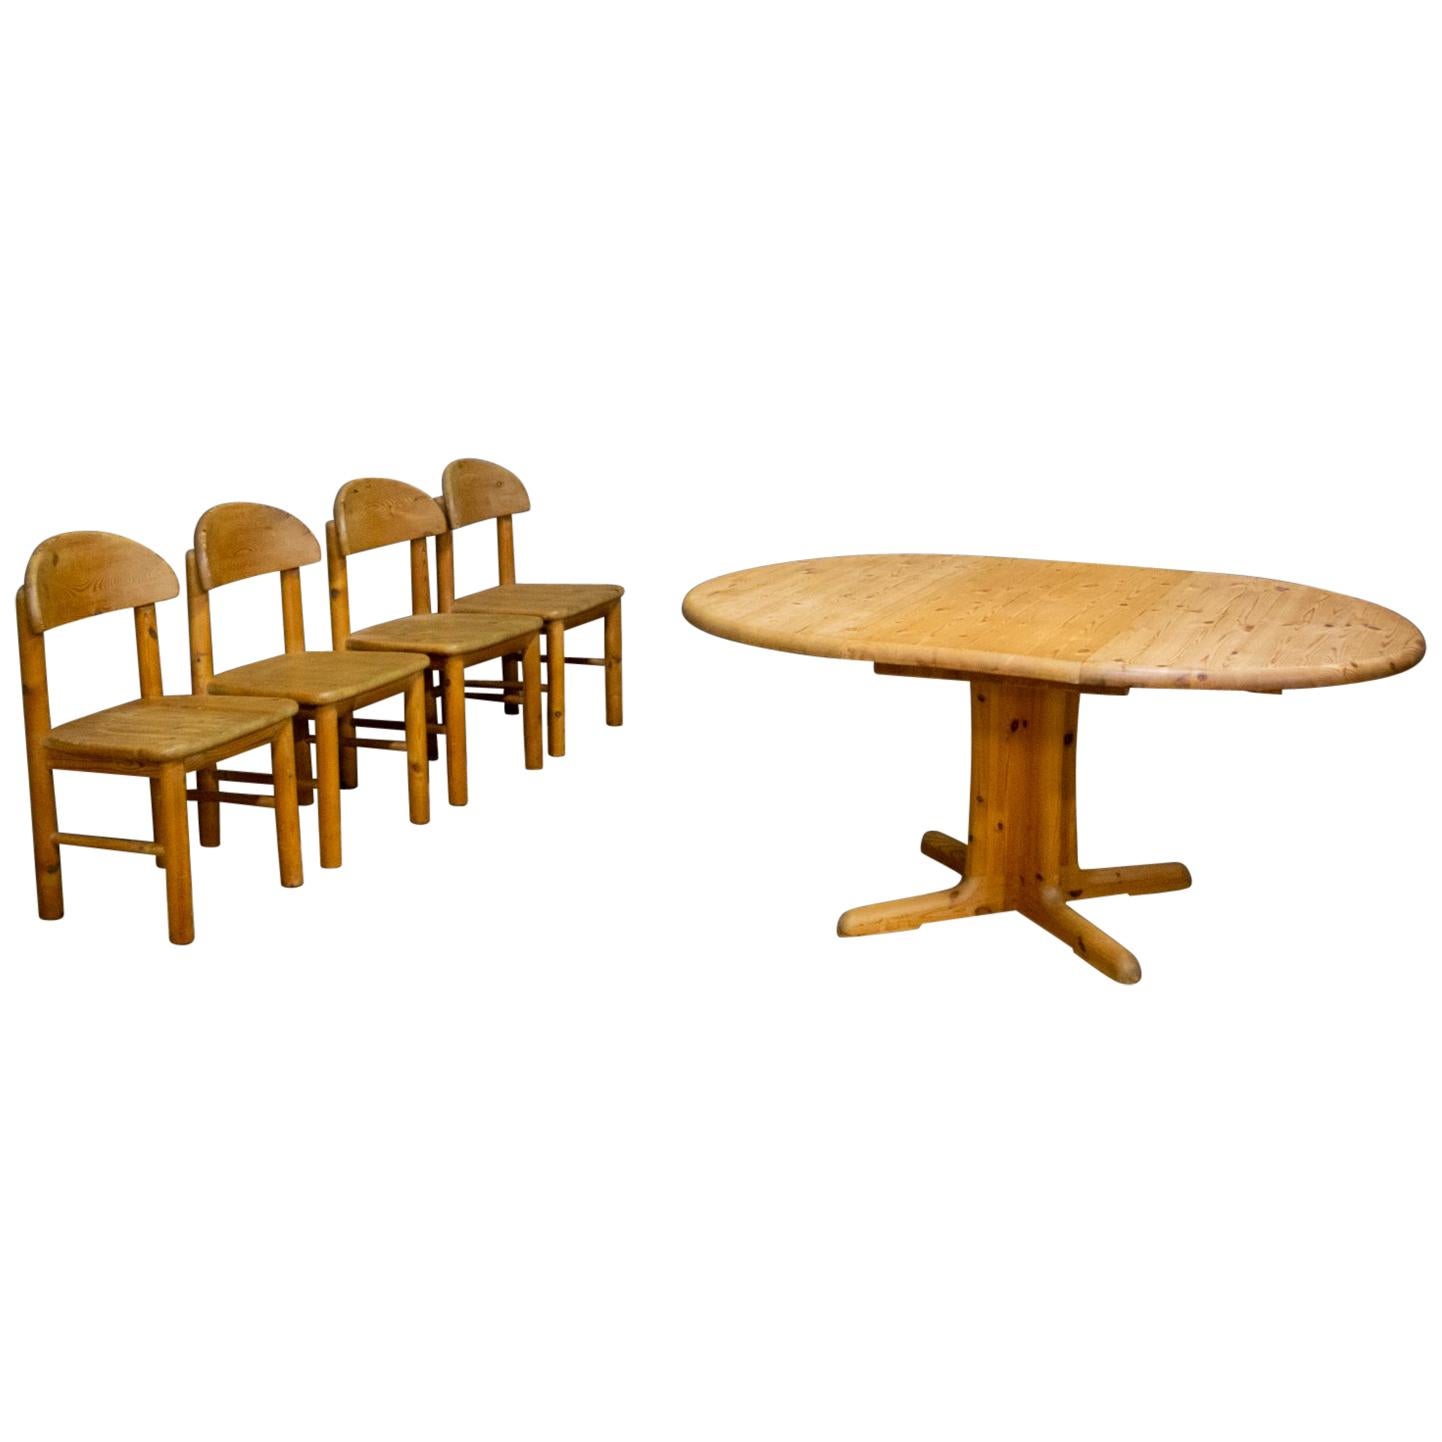 Set of 4 Chairs and Table by Rainer Daumiller for Hirtshal Sawmill, Denmark 1970